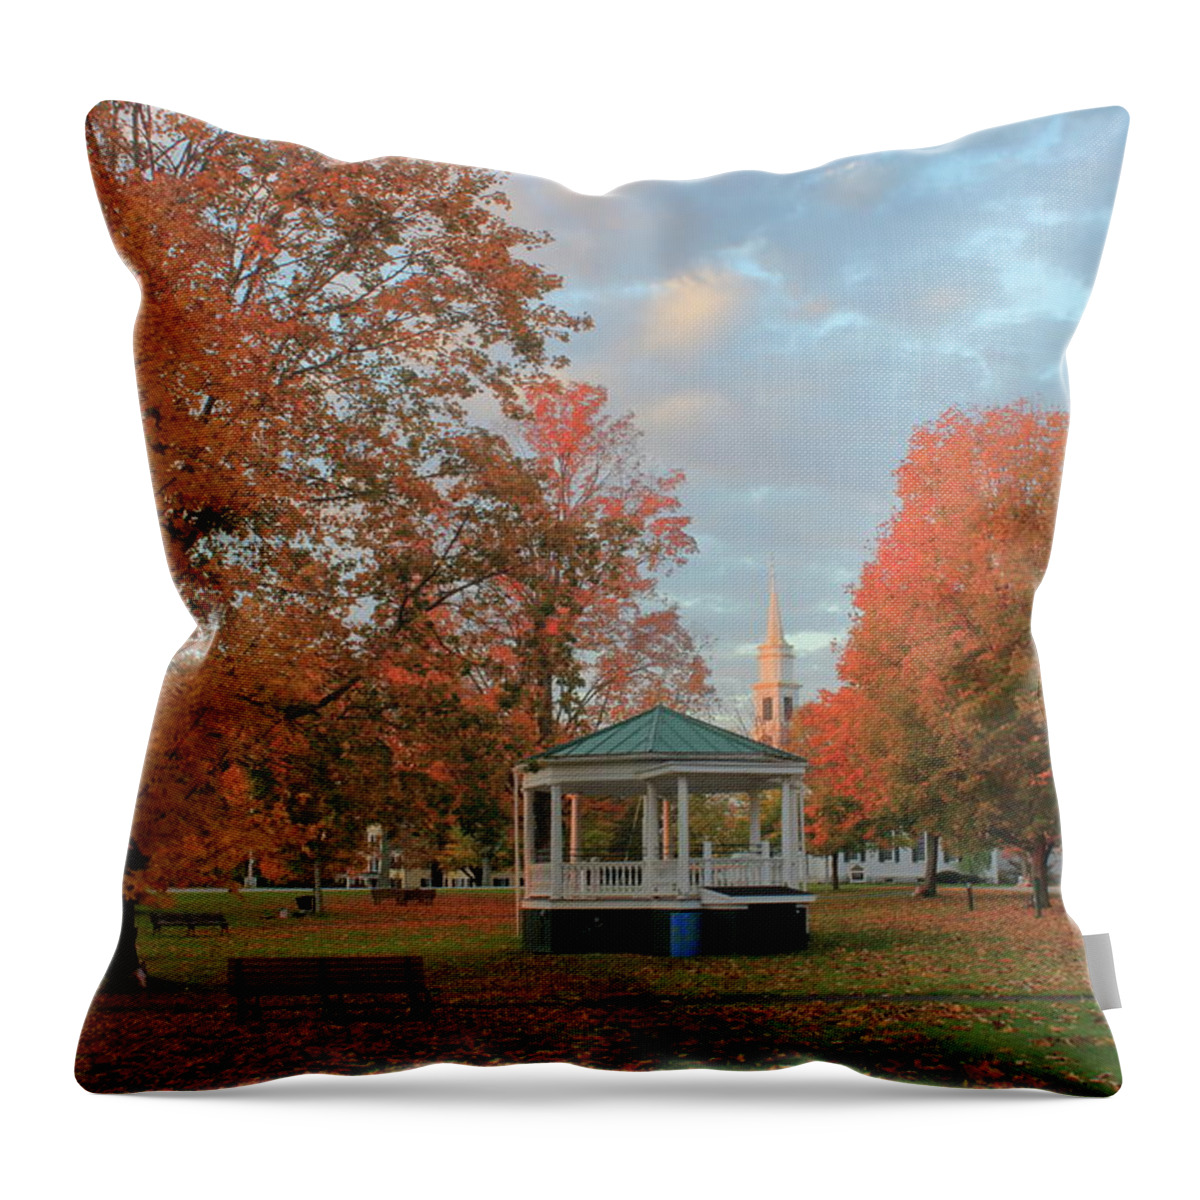 Autumn Throw Pillow featuring the photograph New England Town Common Autumn Morning by John Burk